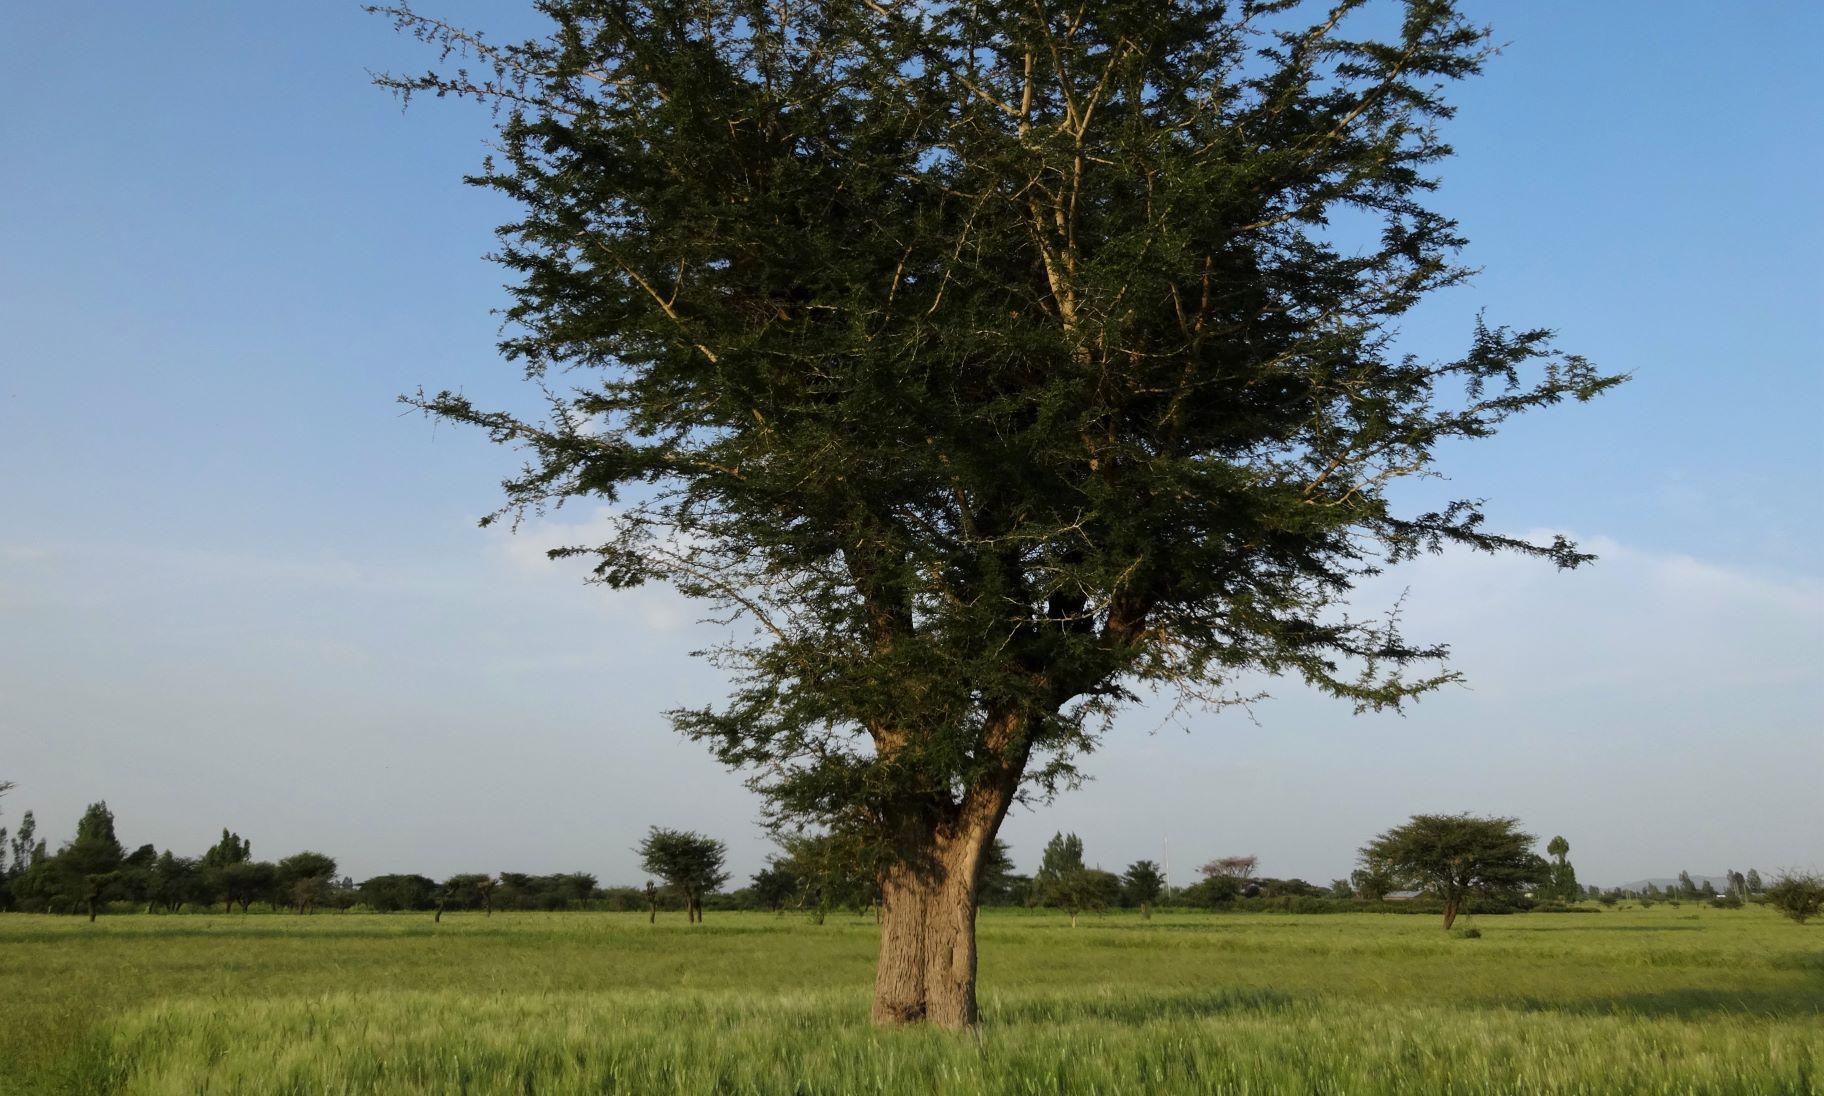 In Ethiopia, scattered trees in crop fields have been practiced for centuries. (Photo: Tesfaye Shiferaw /CIMMYT)